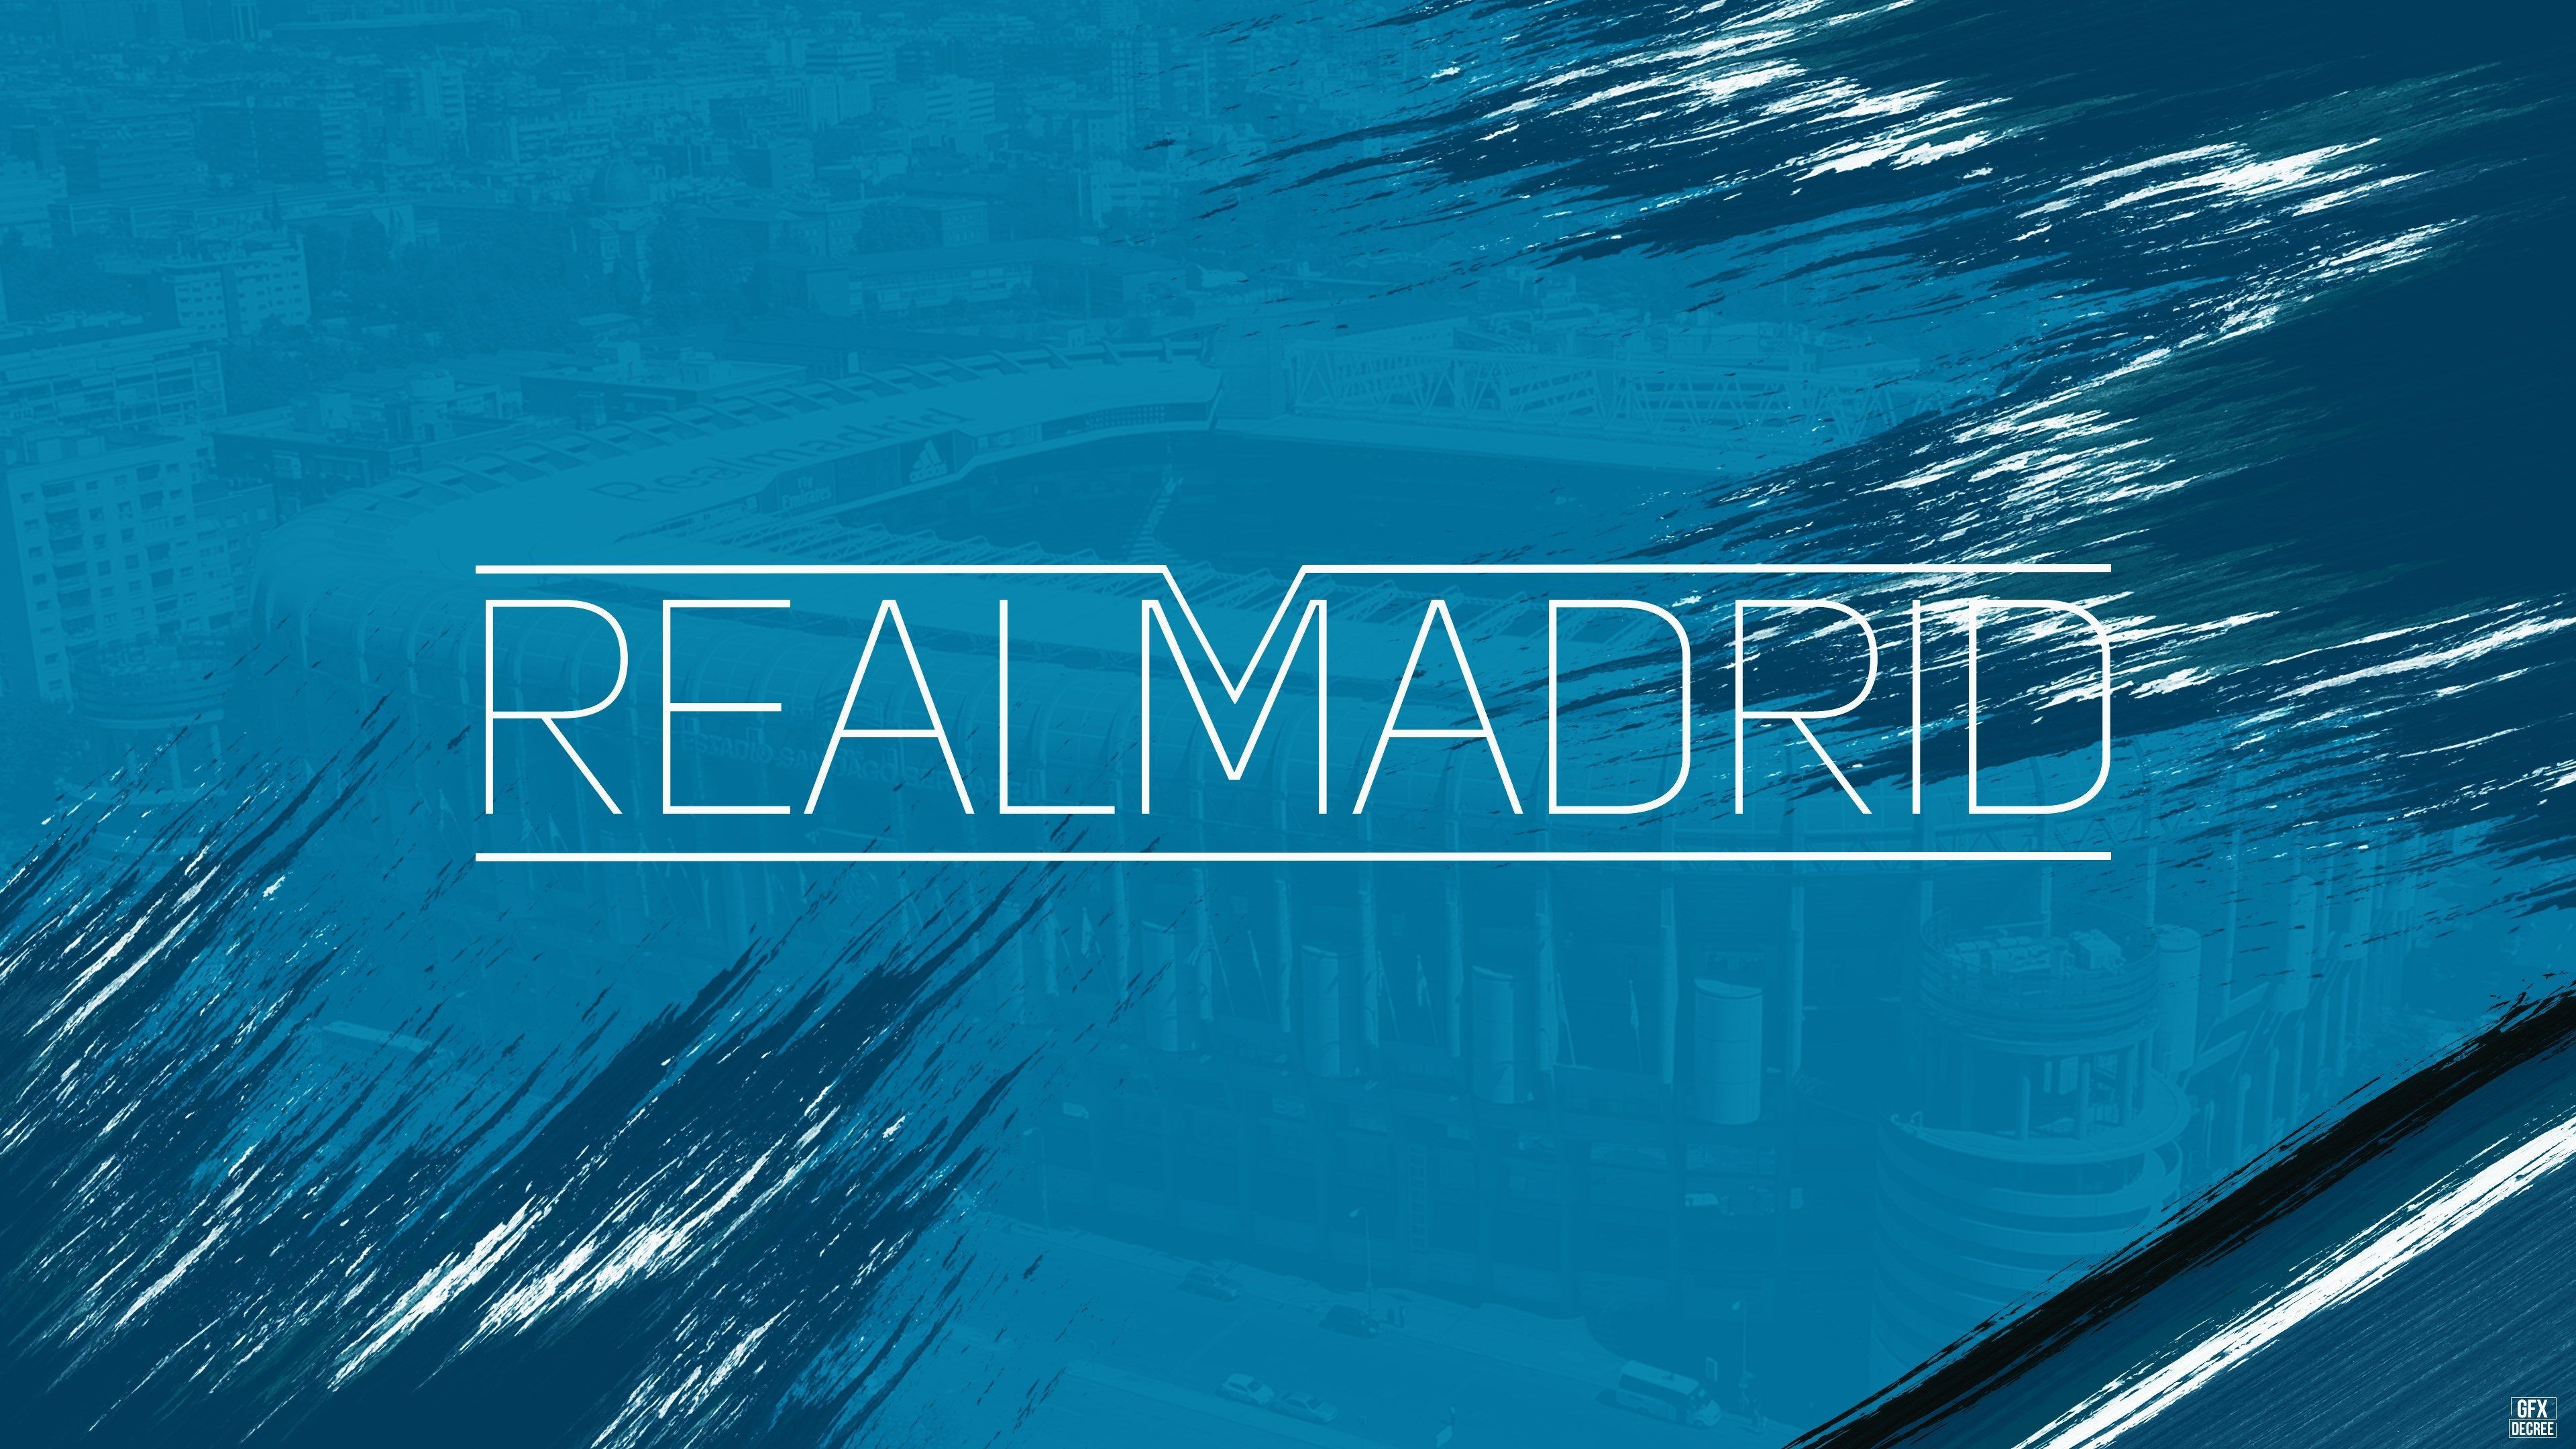 real madrid cf 4k download background for pc. Madrid wallpaper, Real madrid wallpaper, Real madrid